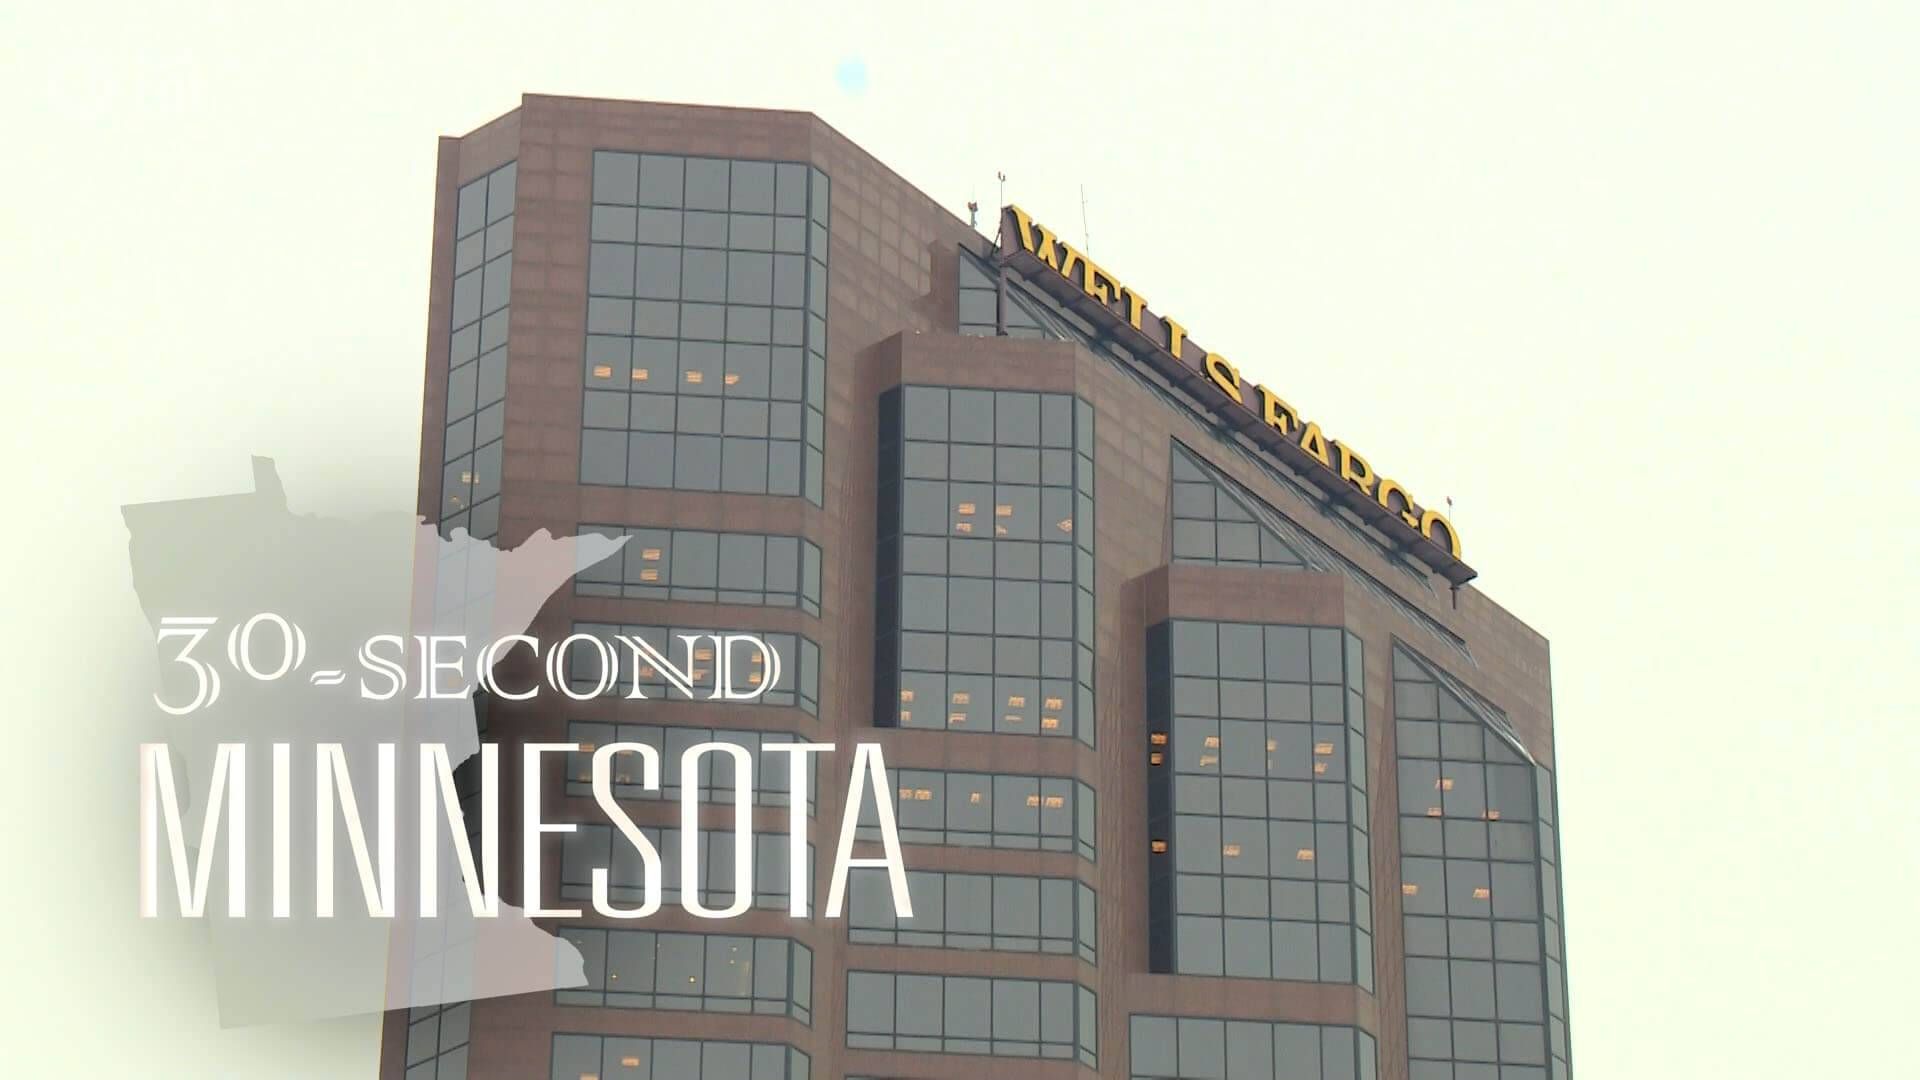 30-Second Minnesota: And the Tallest Building in Saint Paul Is...?